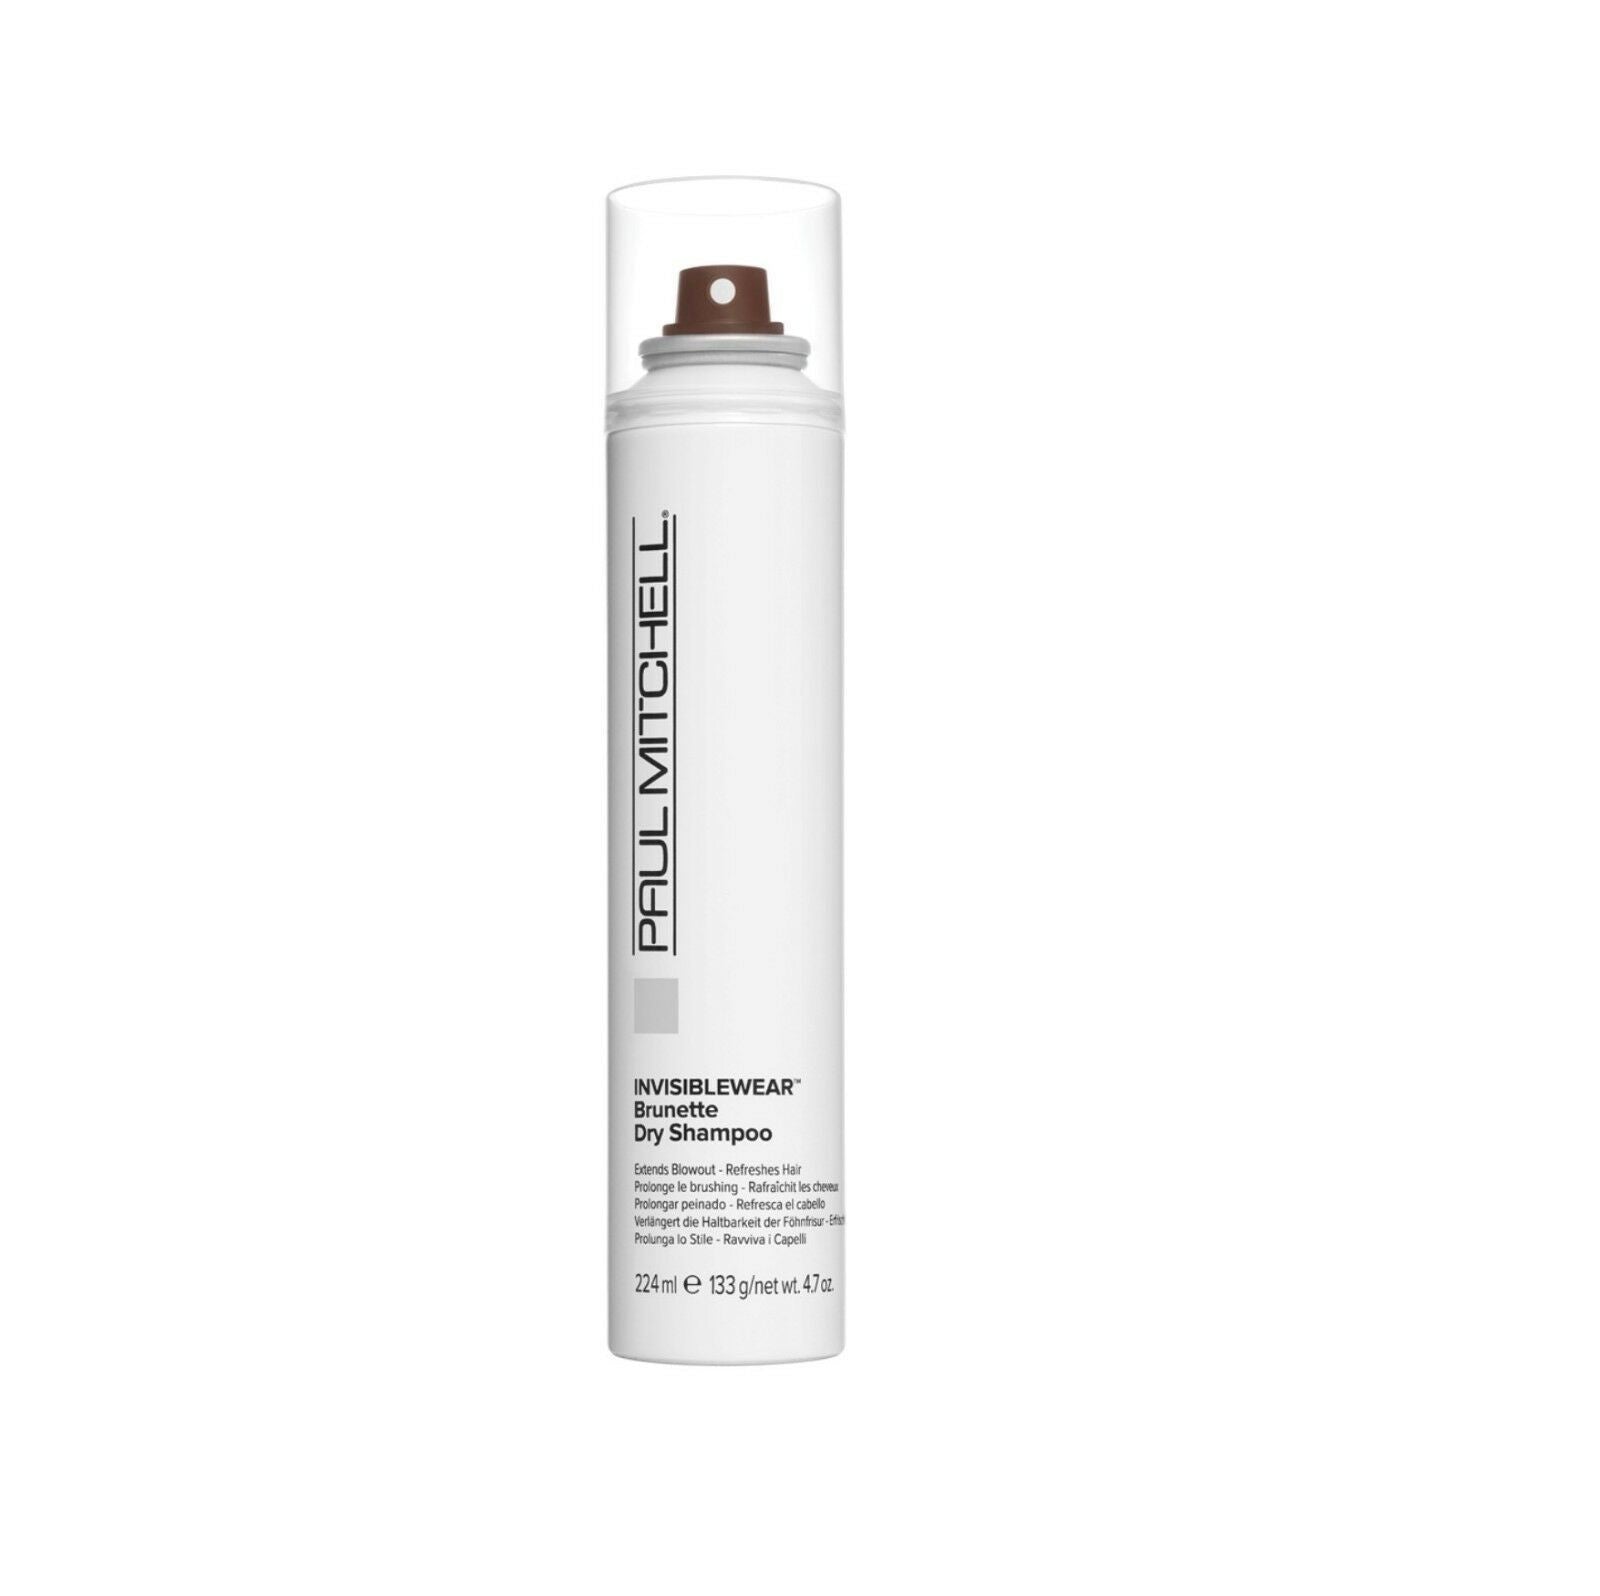 iaahhaircare,Paul Mitchell INVISIBLEWEAR Brunette Dry Shampoo Extends Blowout 224ml x 1,Styling Products,Invisble Wear Paul Mitchell